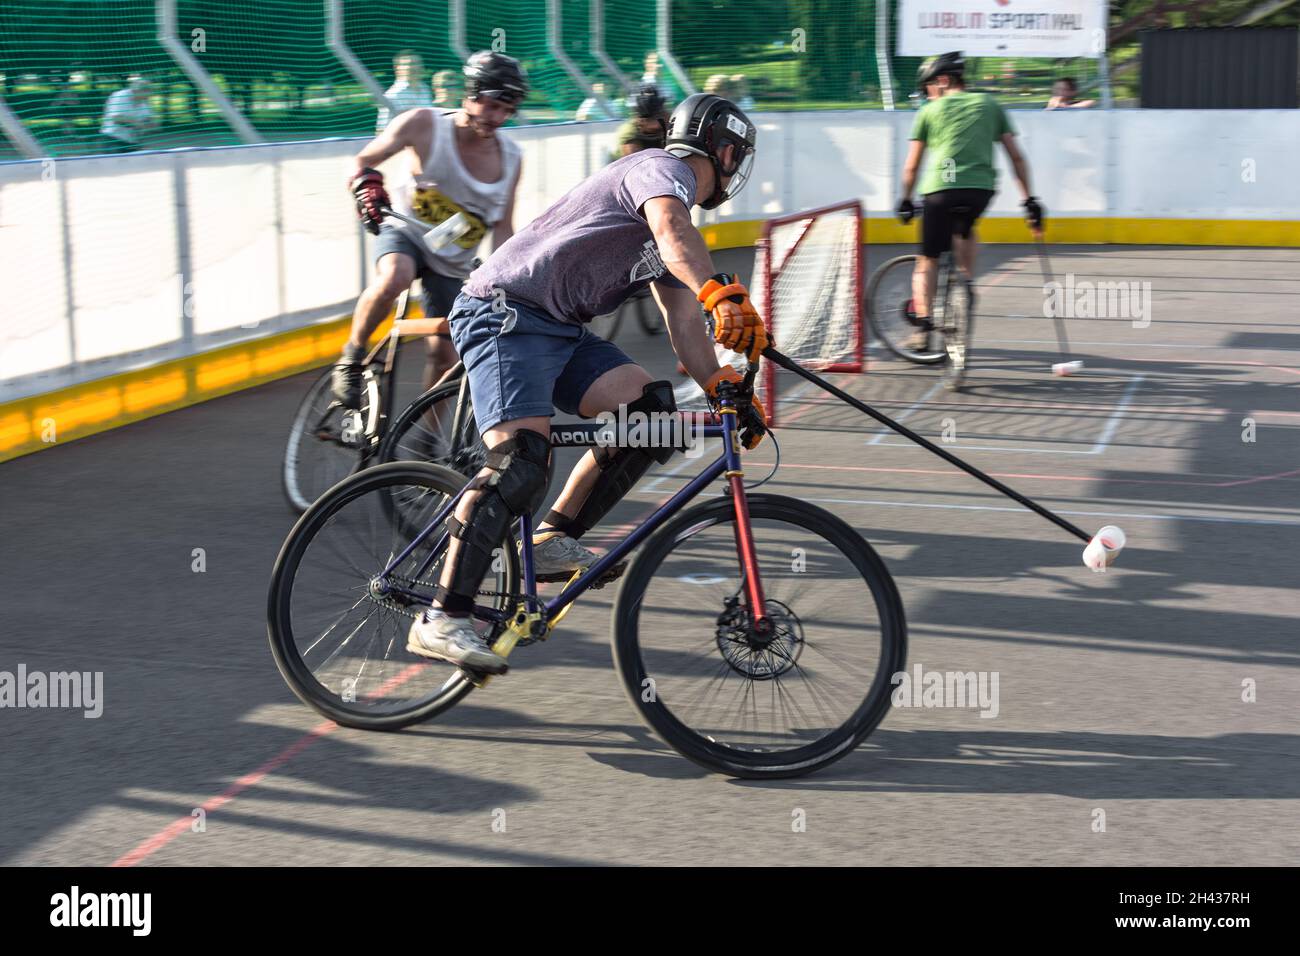 Lublin, Poland - May 29, 2016: Lublin Sportival - Bike polo game at the field in the city centre Stock Photo